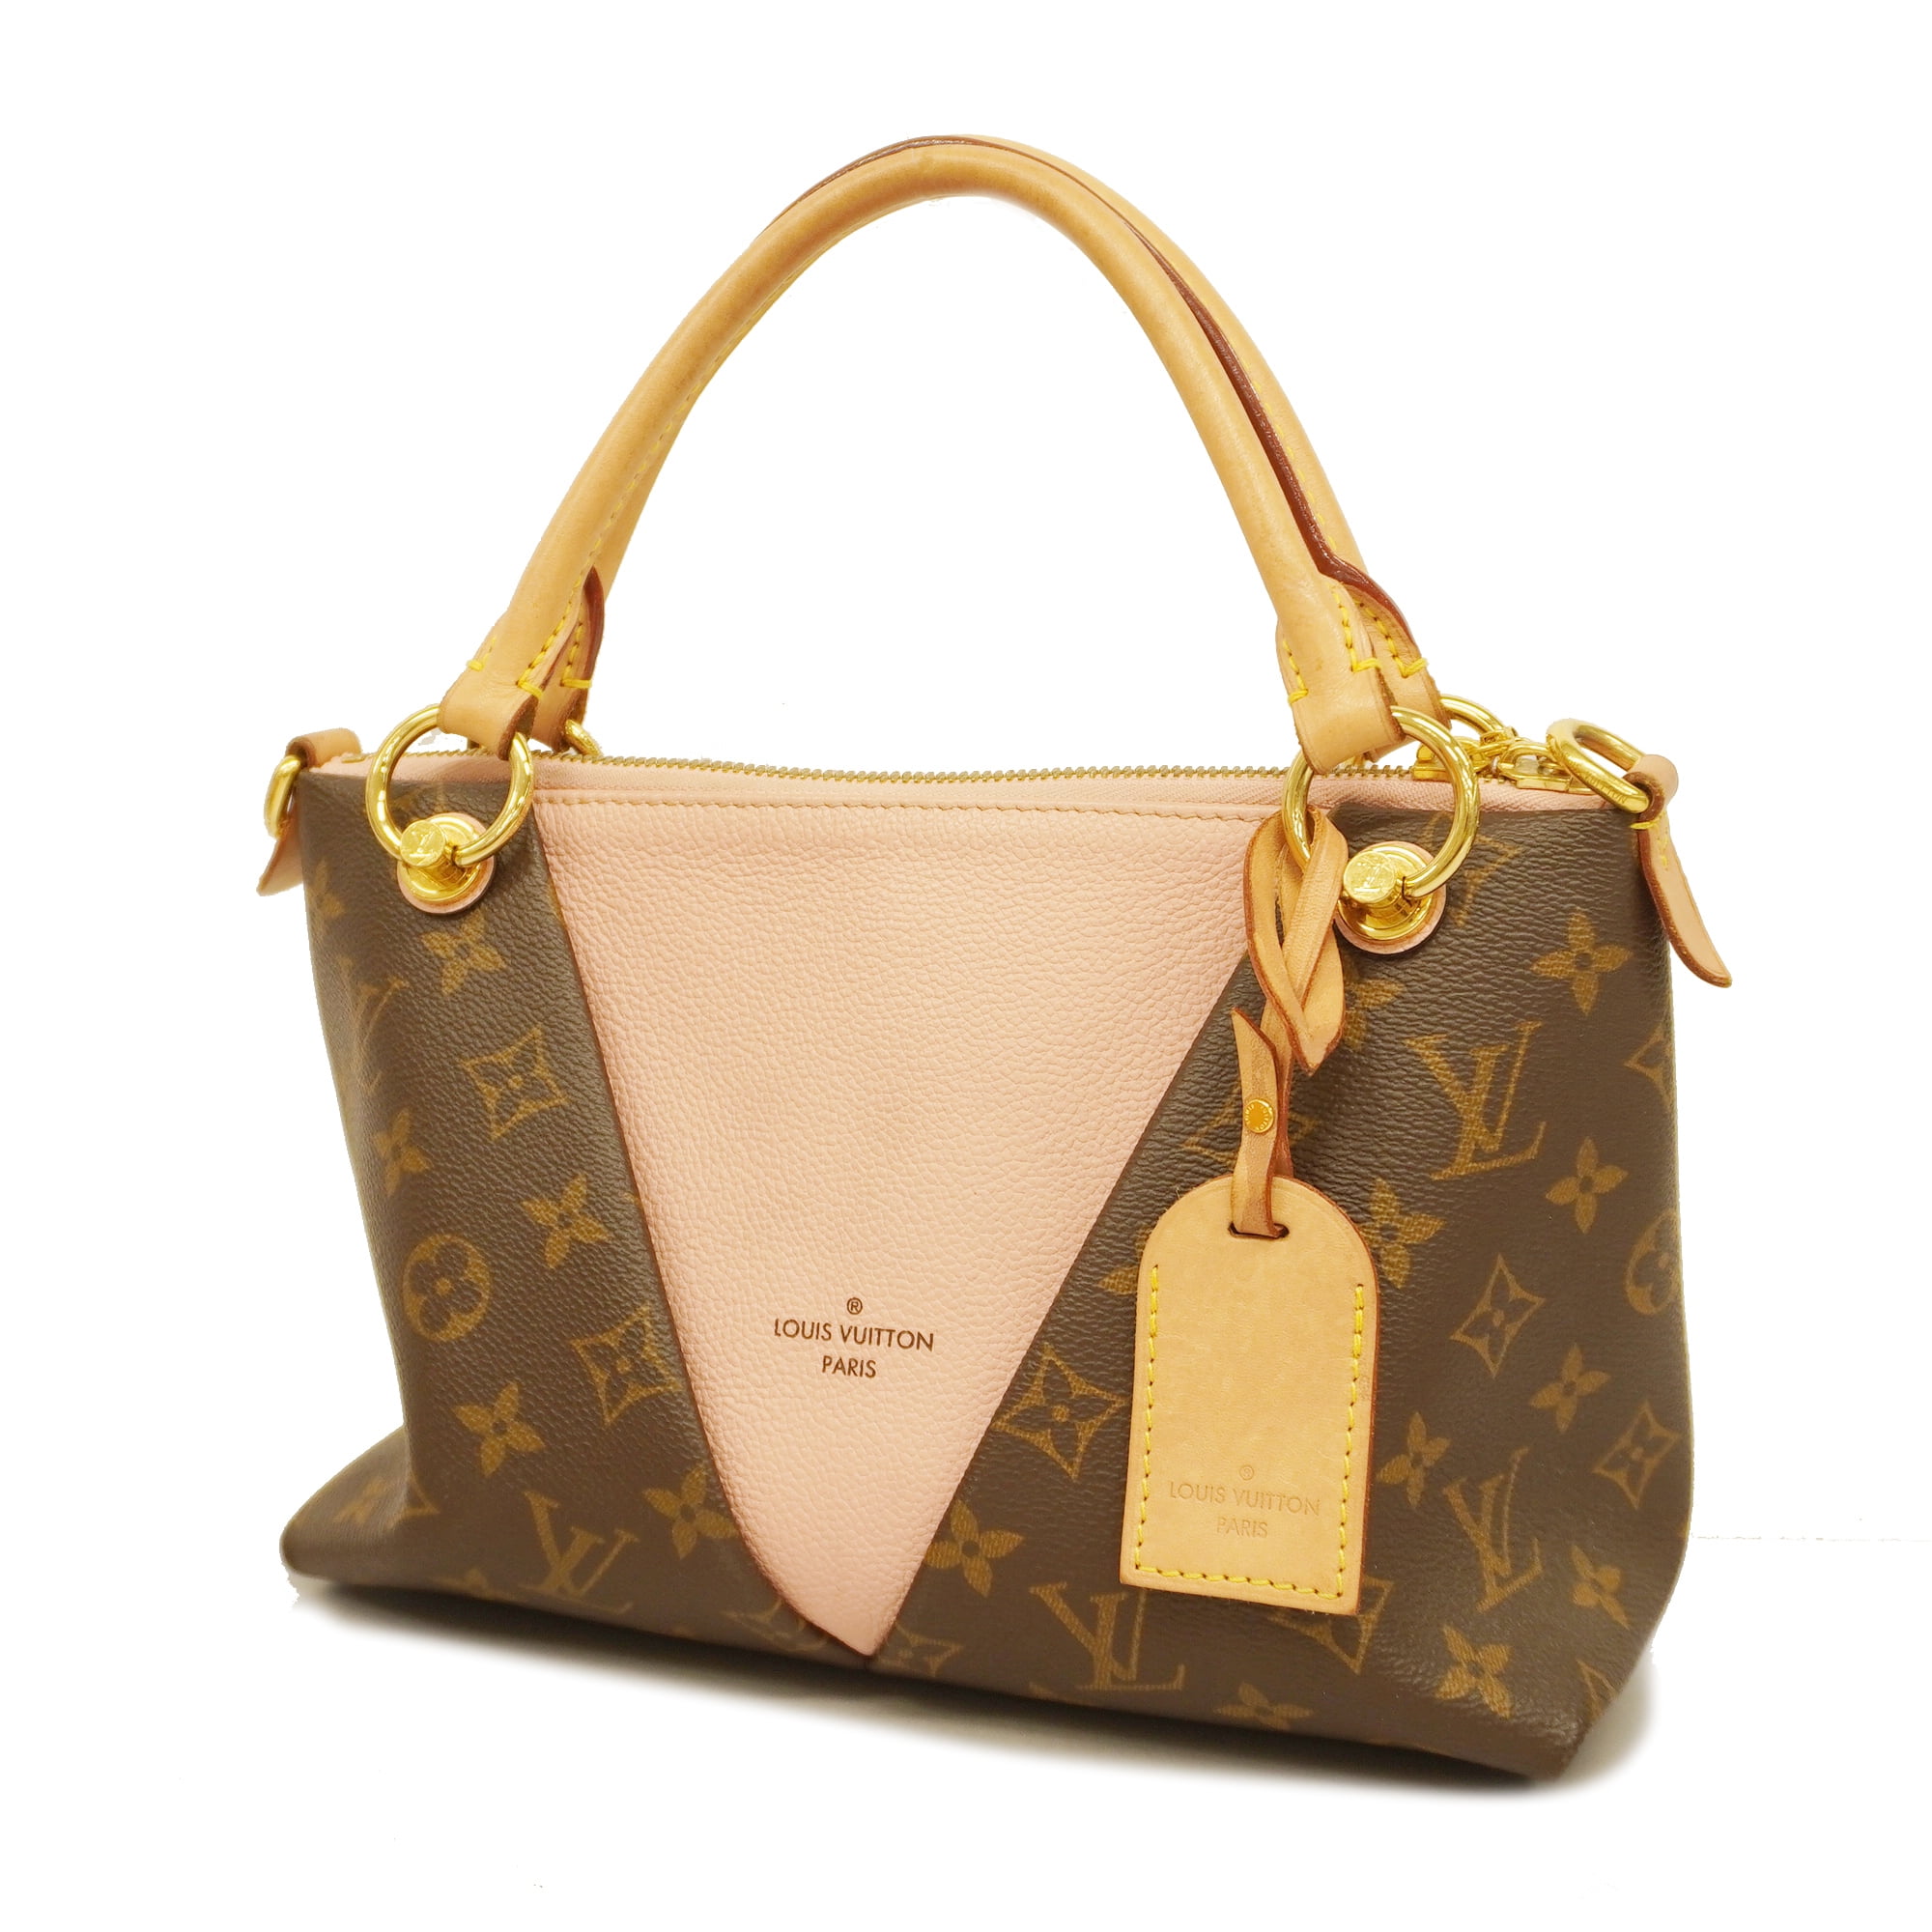 Authenticated Used Auth Louis Vuitton Monogram 2WAY Bag V Tote BB